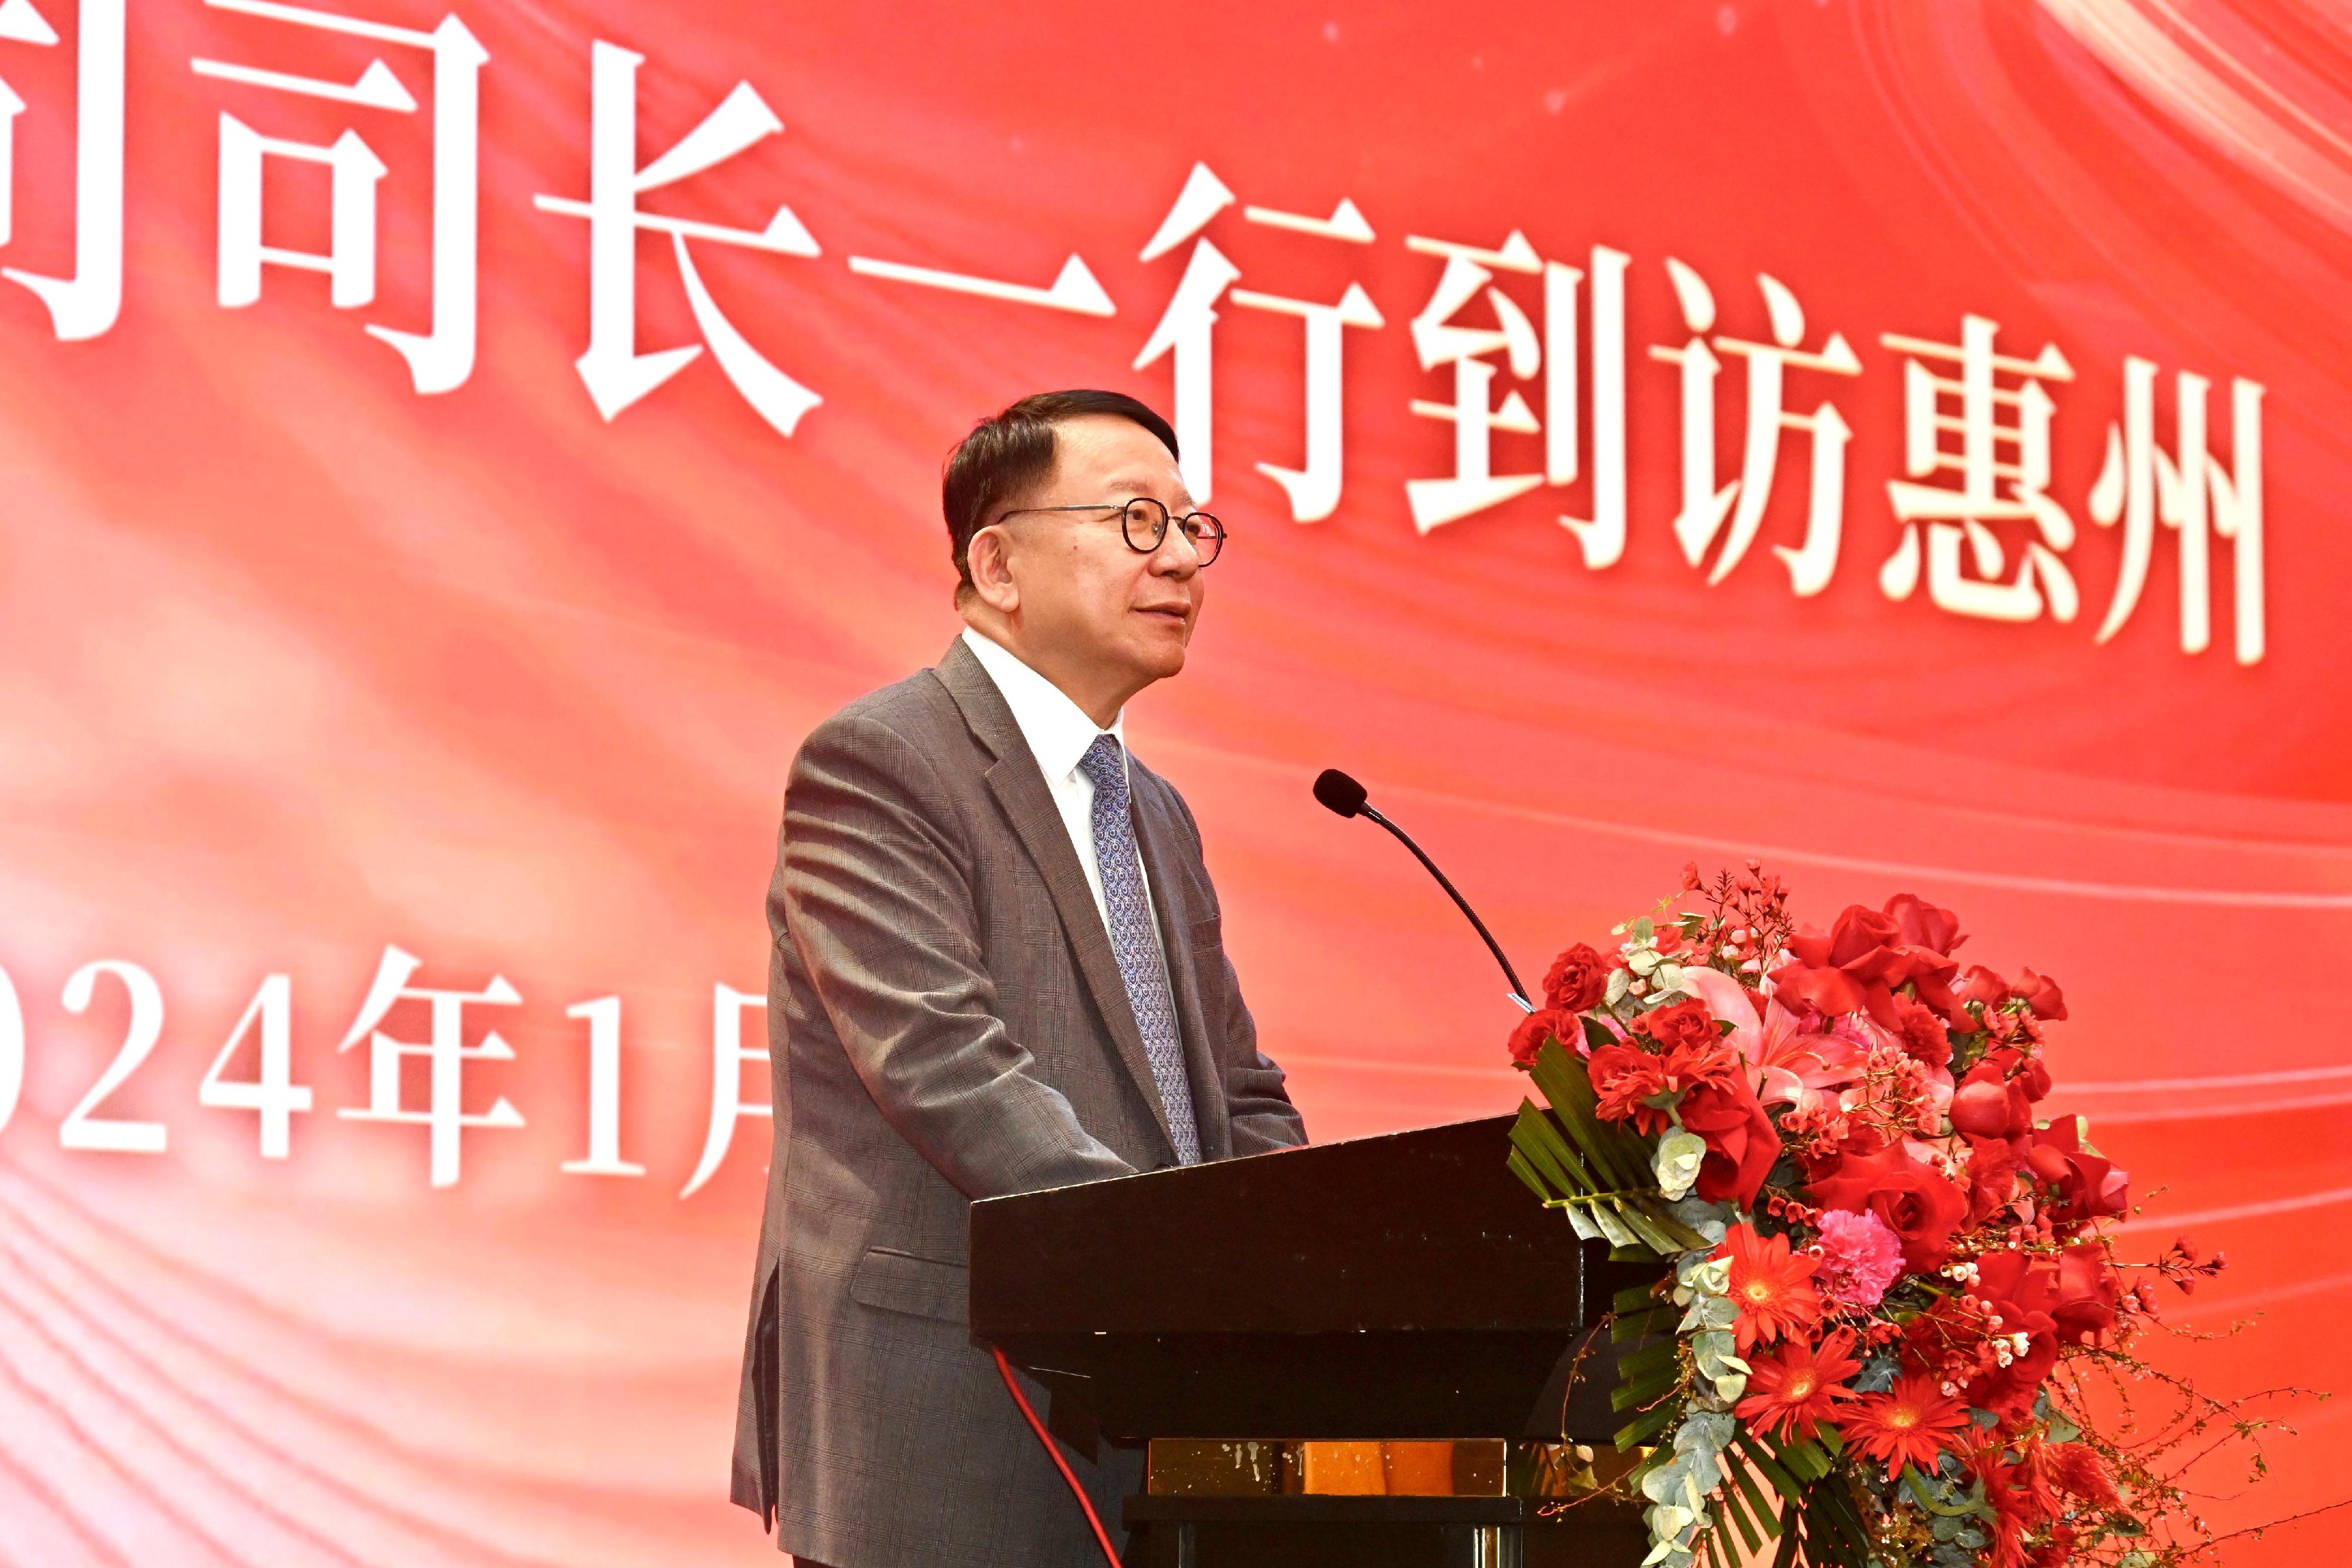 The Chief Secretary for Administration, Mr Chan Kwok-ki, continued his visit to Mainland cities of the Guangdong-Hong Kong-Macao Greater Bay Area in Guangzhou and Huizhou today (January 9). Photo shows Mr Chan speaking at a lunch hosted by the Huizhou Association of Enterprises with Foreign Investment.